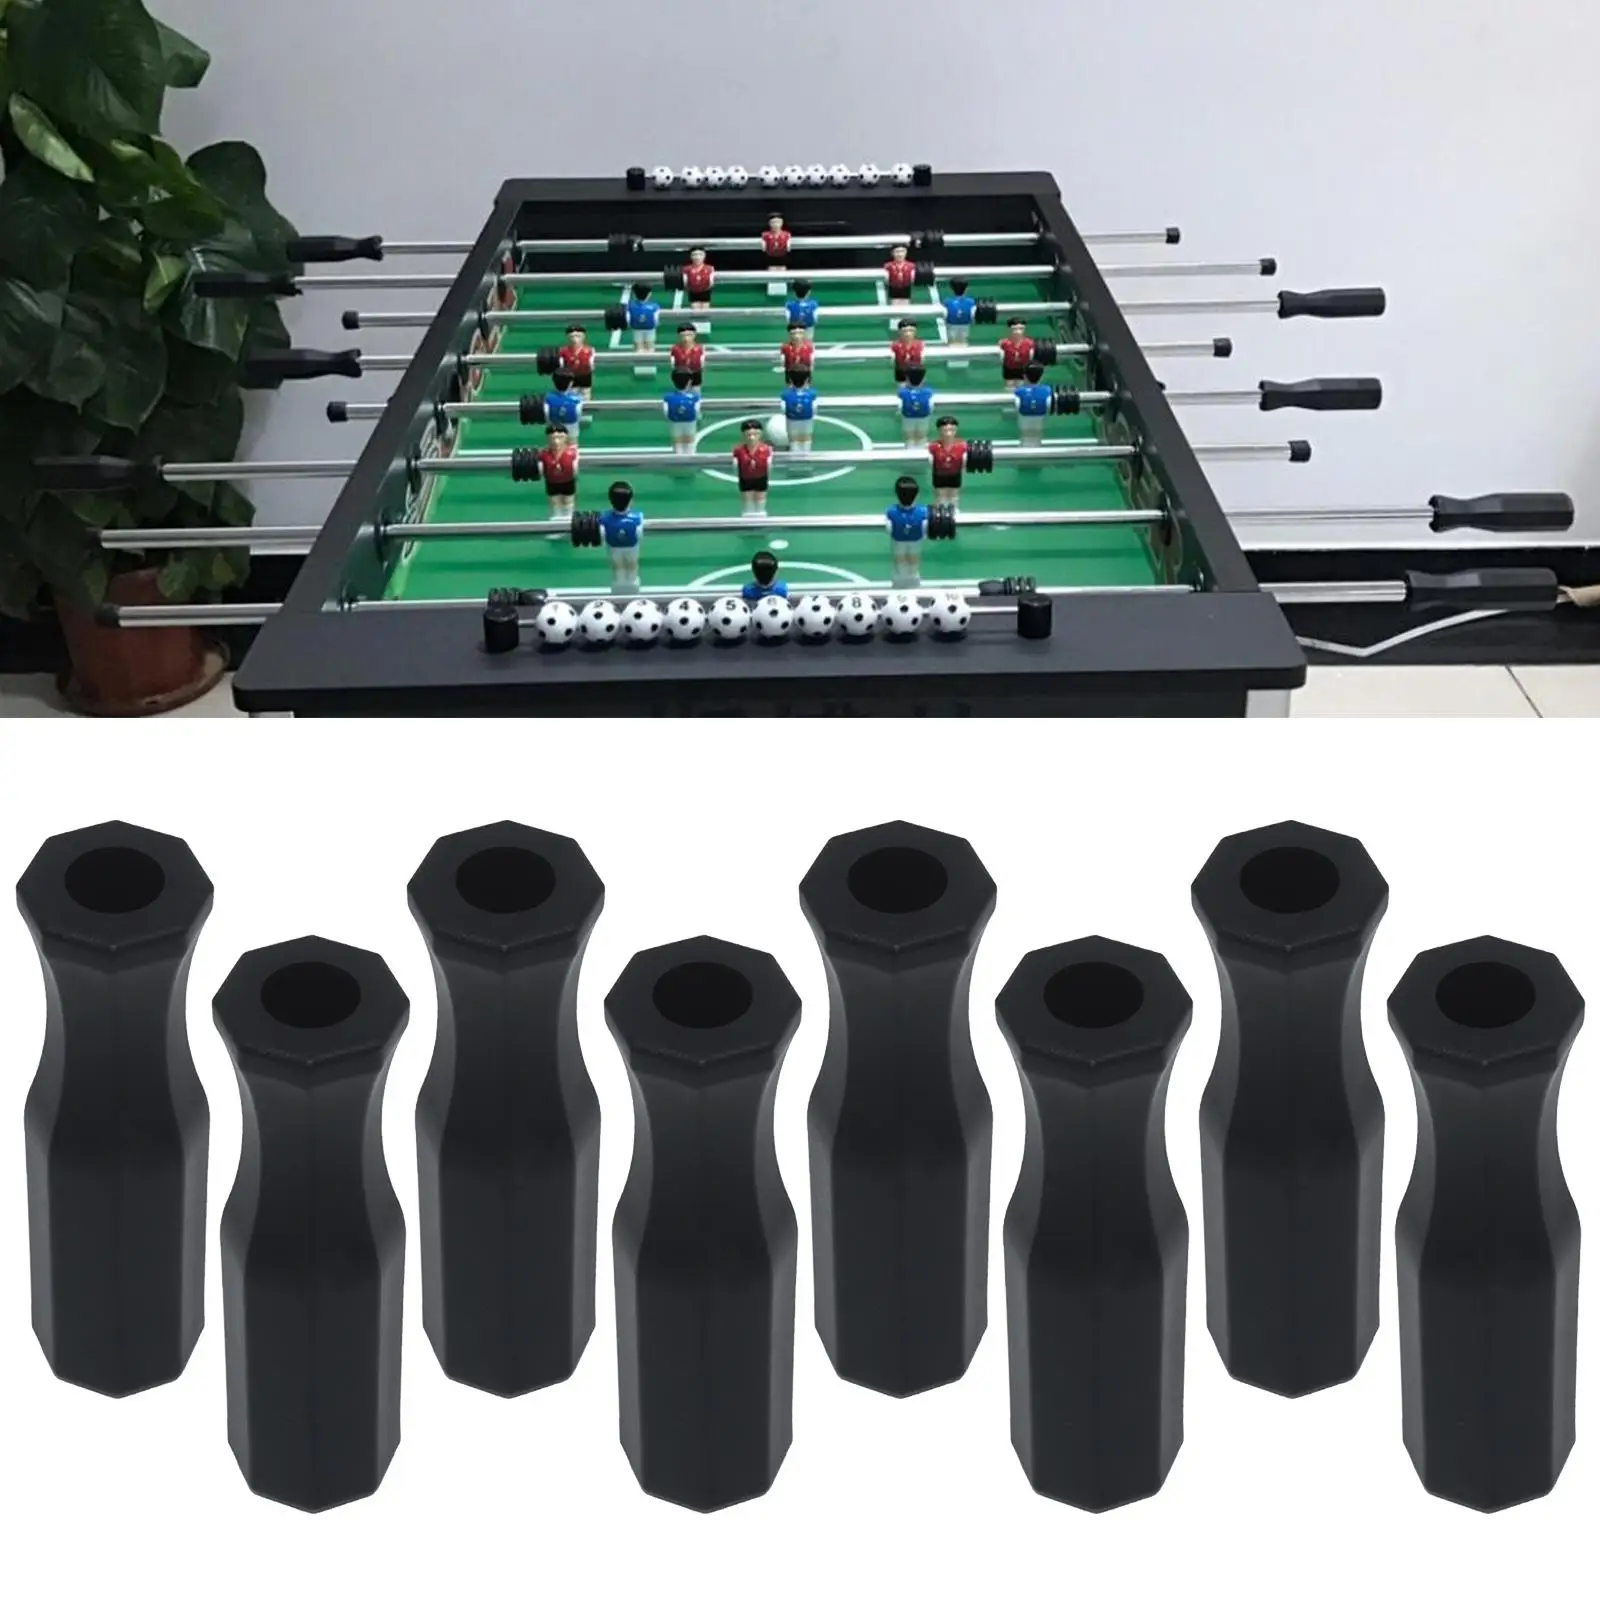 Foosball Handle Grips for Foosball Table, Table Soccer Foosball Accessories for 5/8 Inch Foosball Rods, 8 Pack